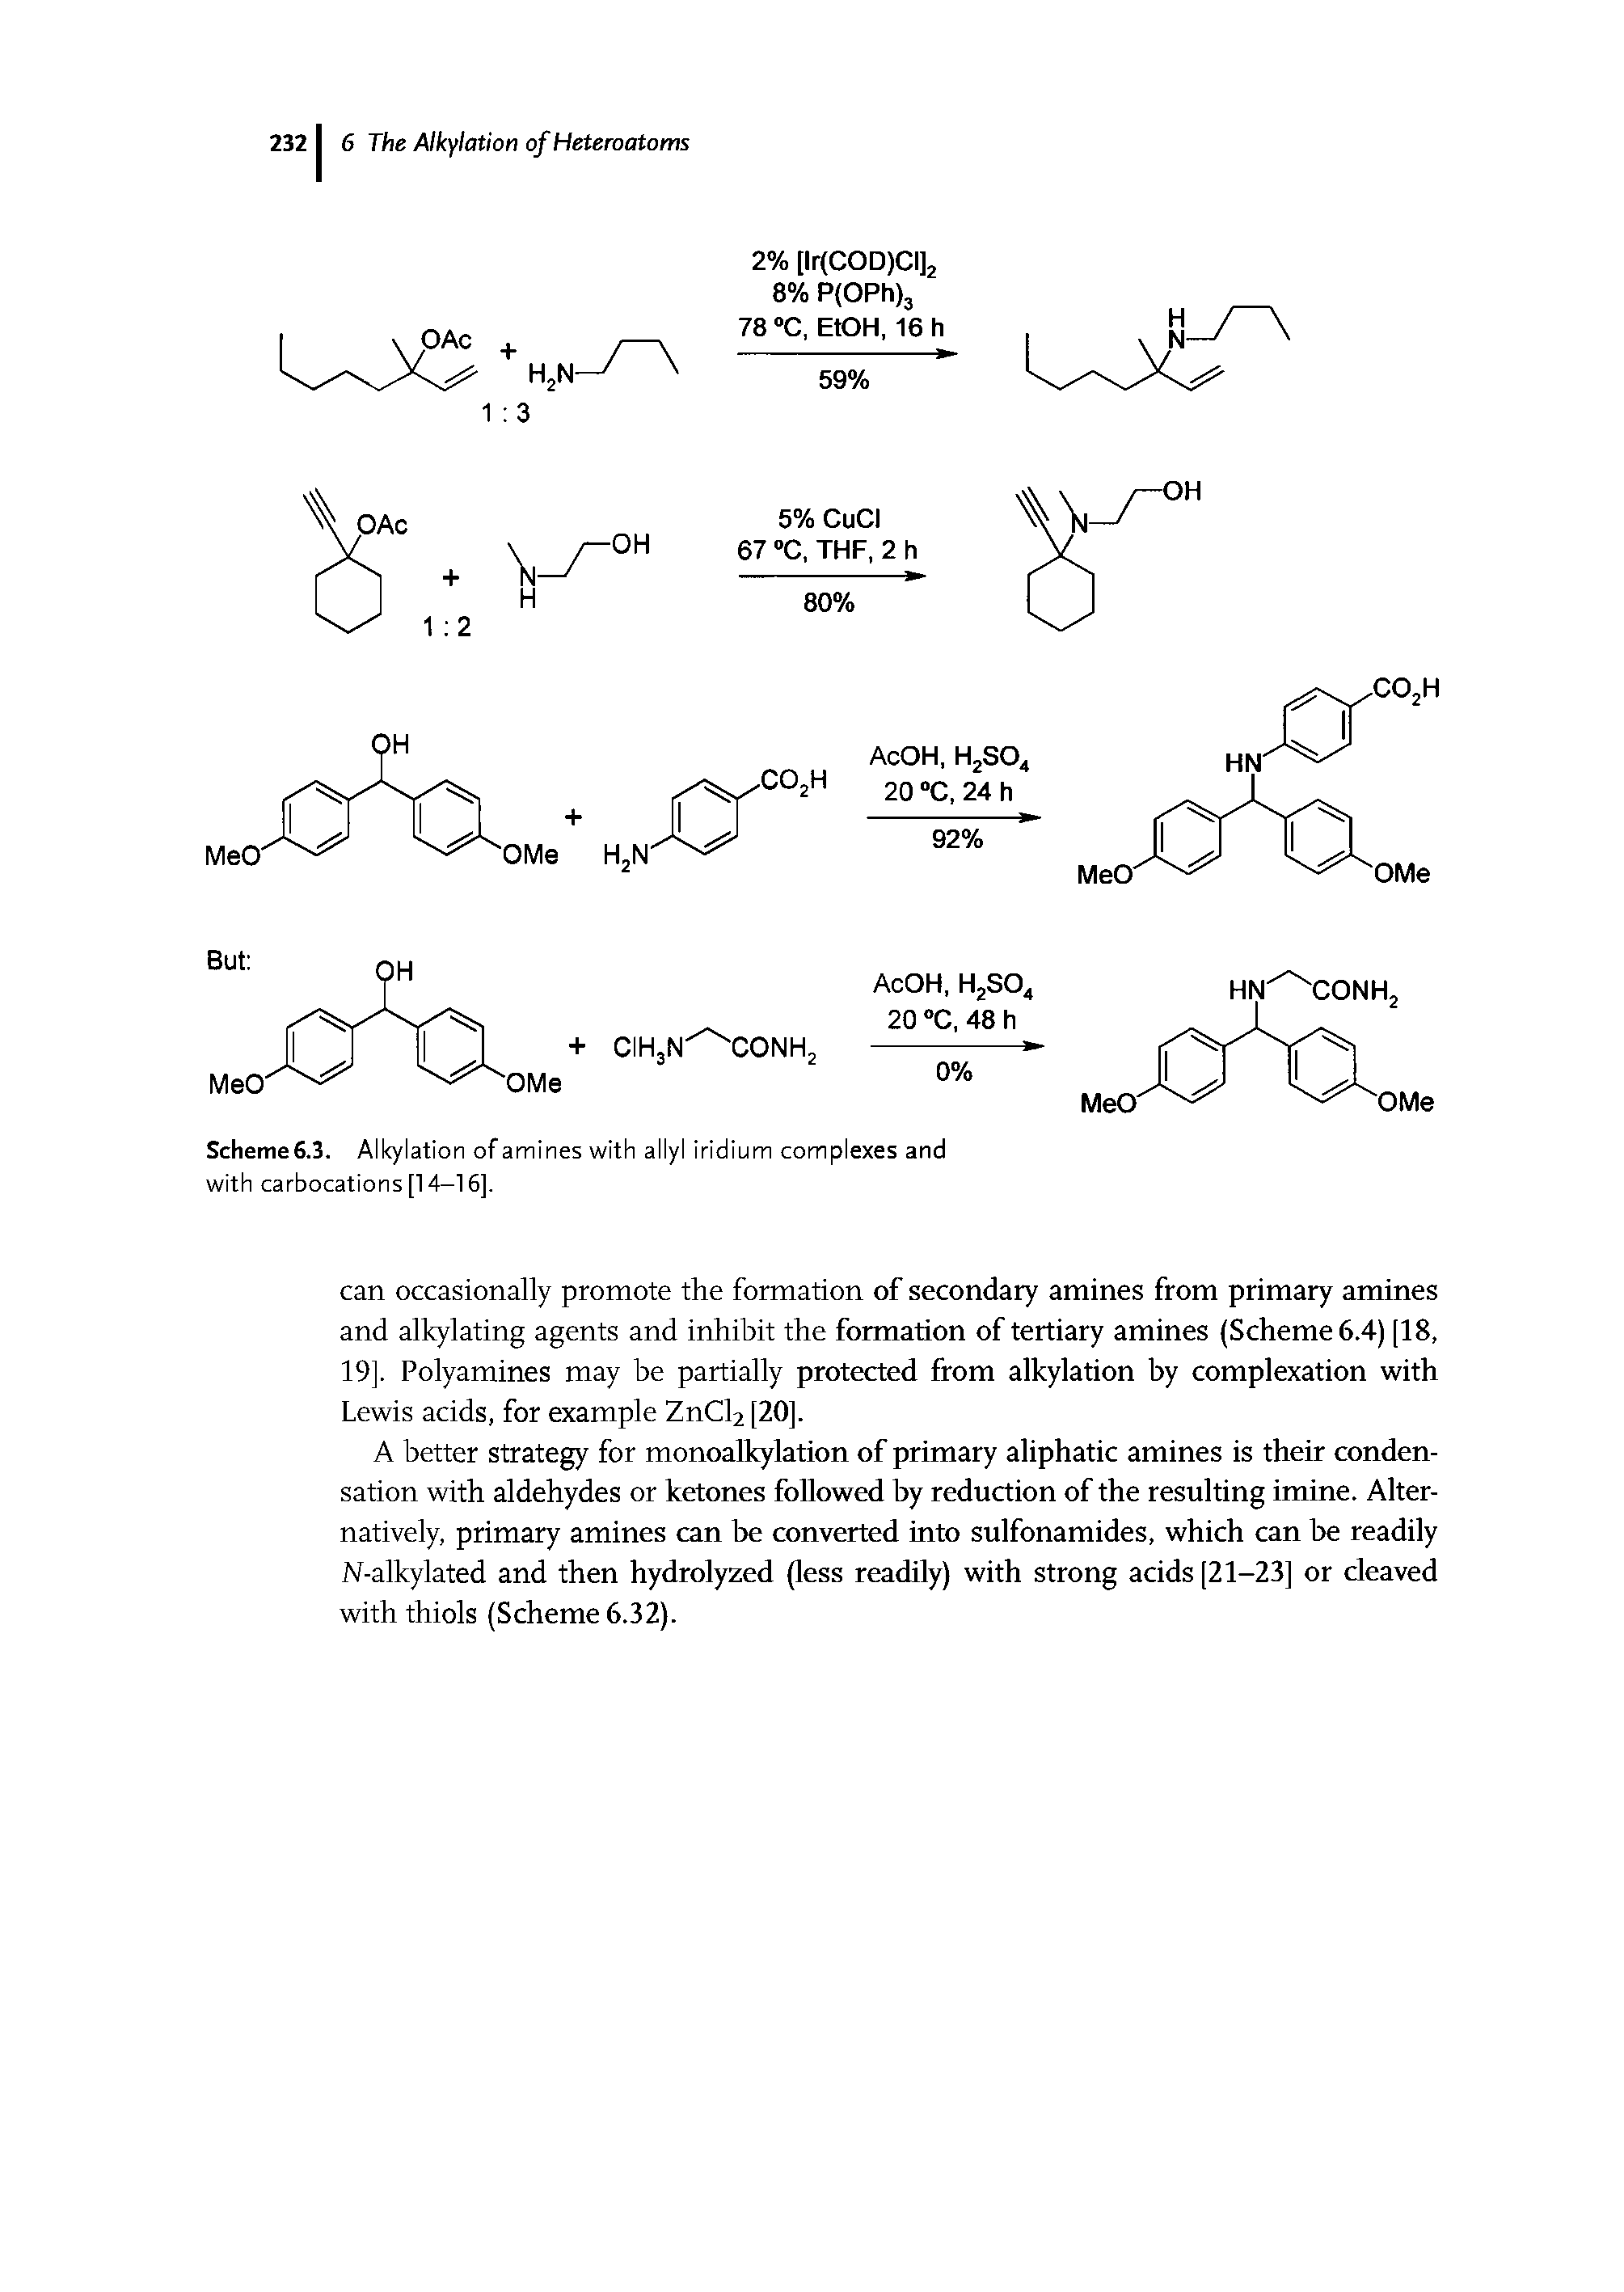 Scheme 6.3. Alkylation of amines with allyl iridium complexes and with carbocations [14-16],...